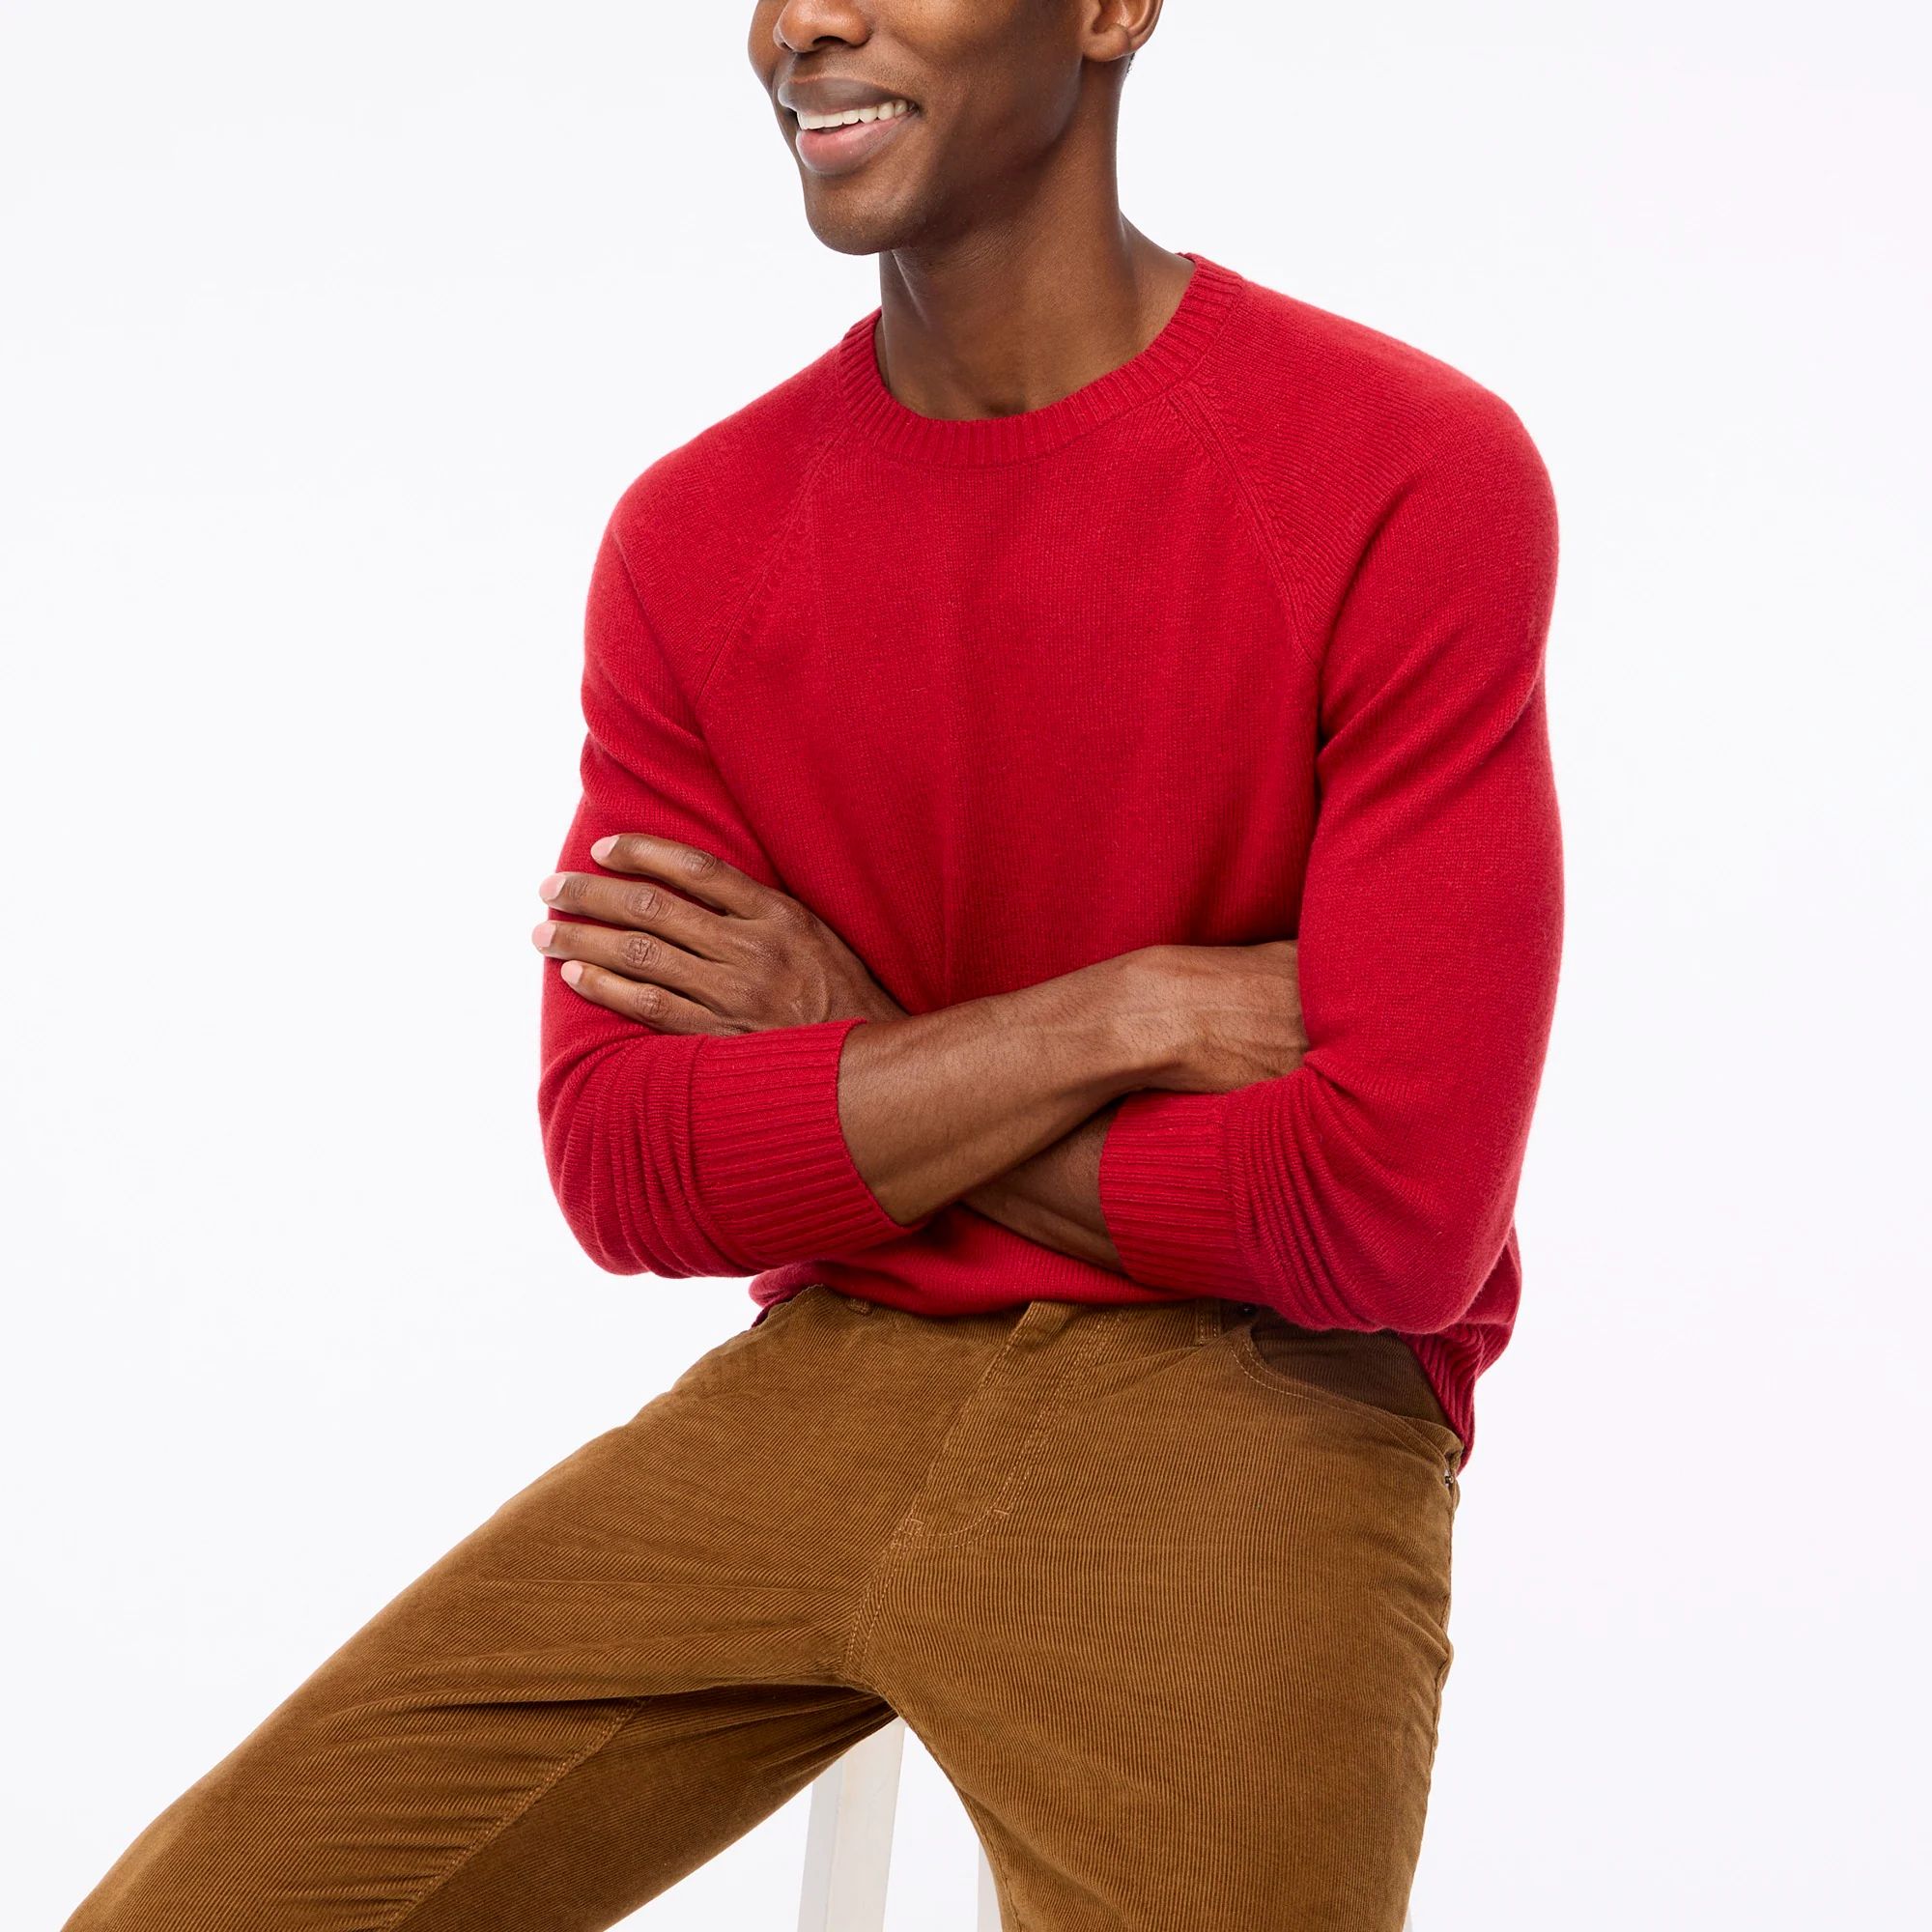 Crewneck sweater in supersoft lambswool blend | J.Crew Factory